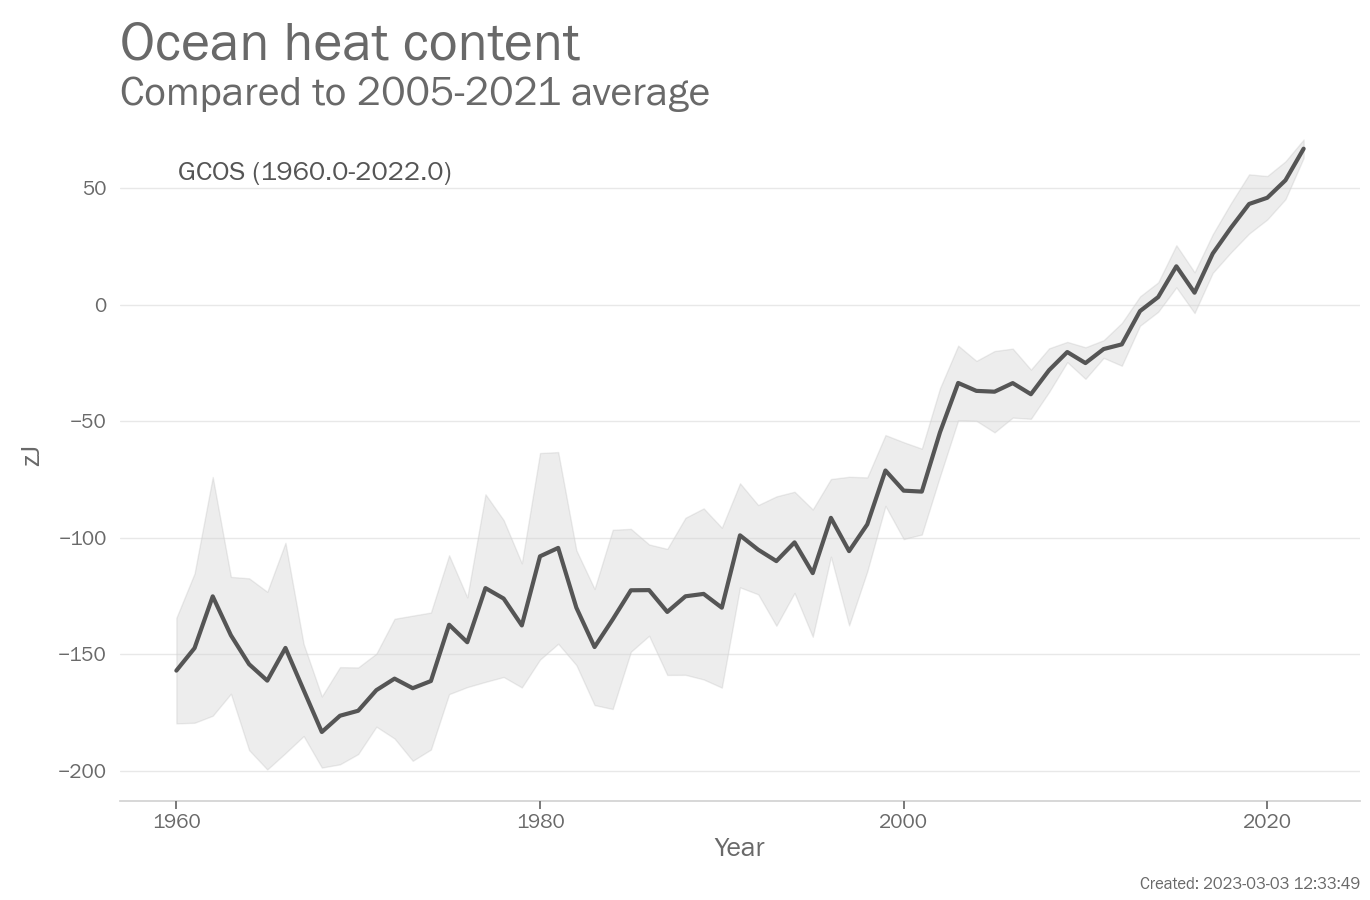 Annual Global ocean heat content (zJ, difference from the 2005-2021 average)  from 1960.0-2022.0. Data are from GCOS.